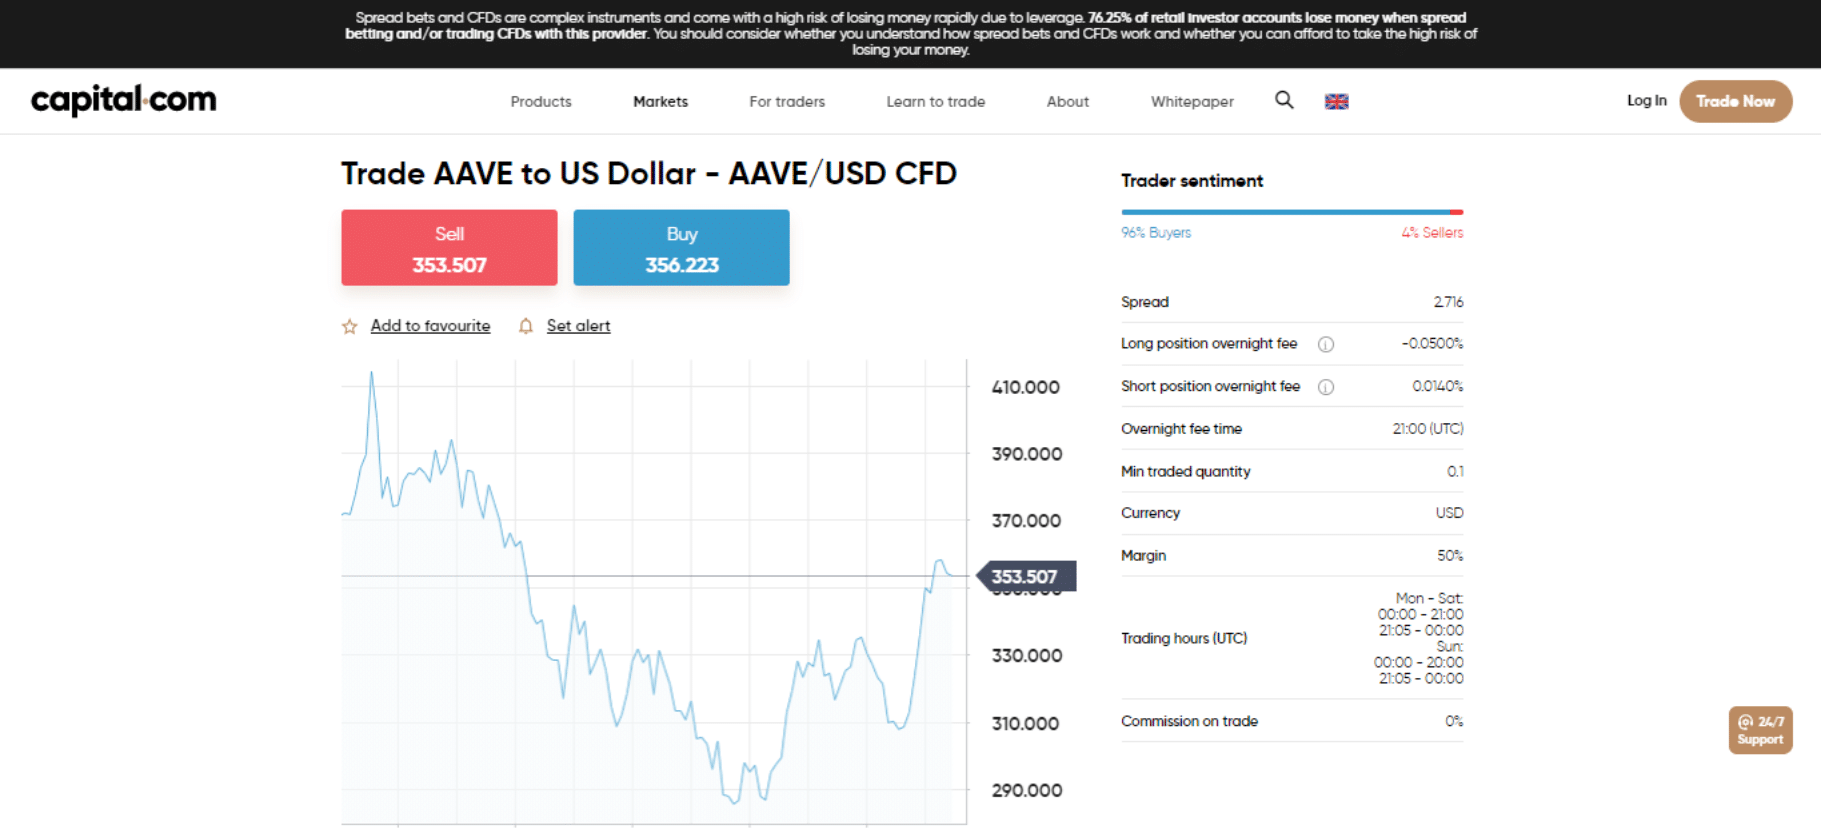 Capital.com — Best Broker for Aave Crypto Trading